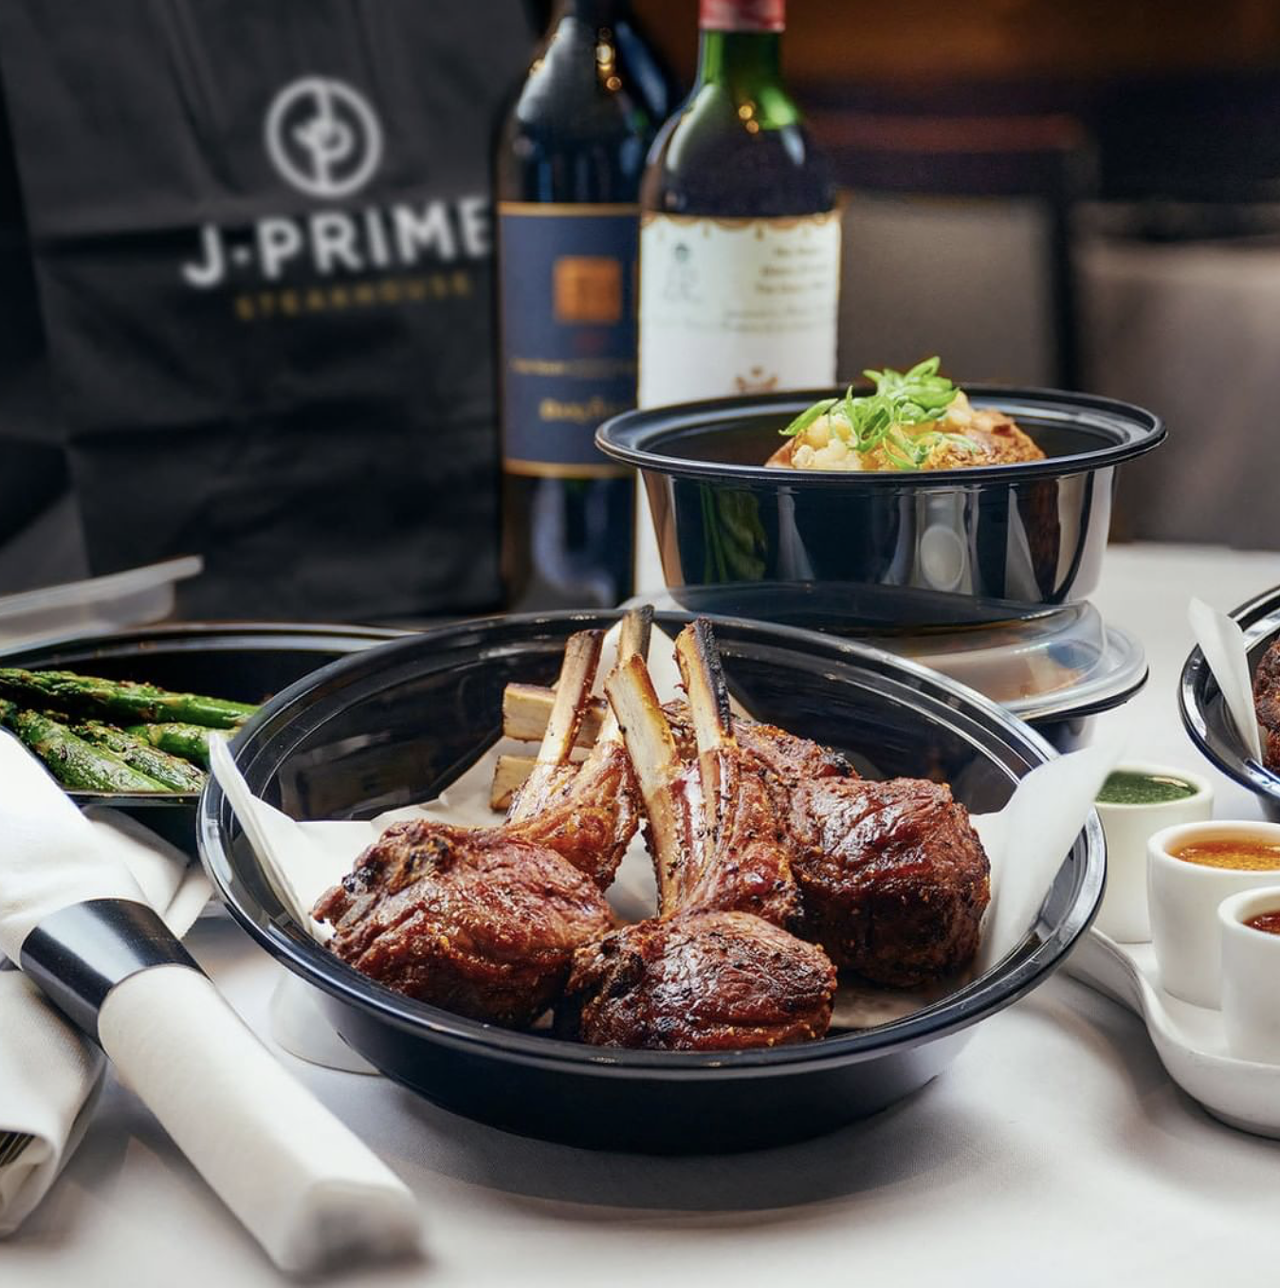 18. J-Prime Steakhouse
1401 N Loop 1604 W, (210) 764-1604, jprimesteakhouse.com
18. J Prime is a go-to for a lot of San Antonians who are looking to splurge a little for a special occasion, and even though COVID-19 has slowed the restaurant industry down exponentially, diners are still braving the pandemic for amazing food and service. Brandy G. said, “Do yourself a favor, and the next time you want to splurge on dinner or are celebrating a special occasion, let the team at J Prime take care of you.” 
Photo via Instagram /  jprimesteakhouse